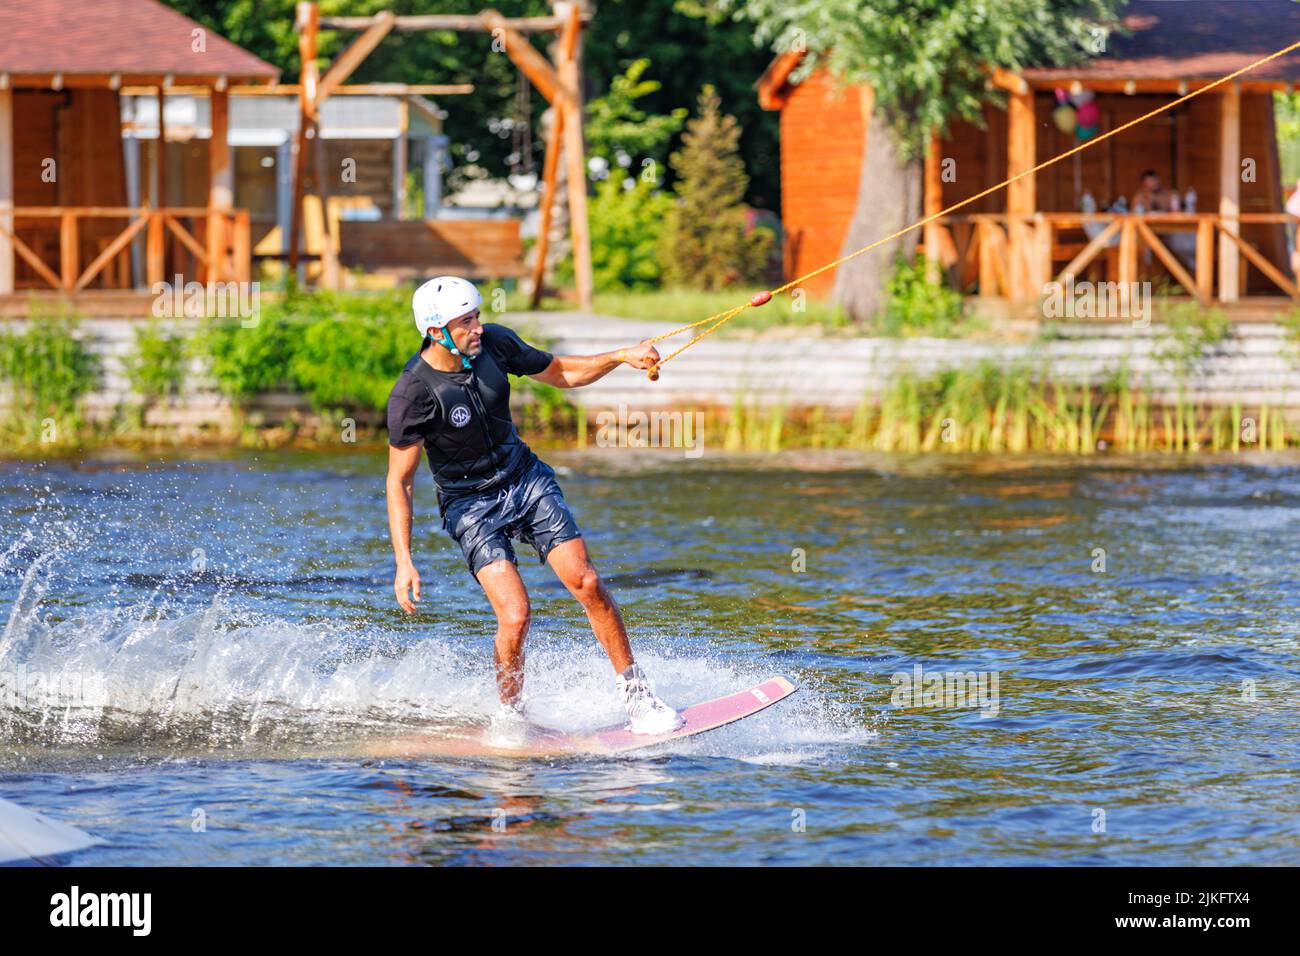 A wakeboarder in a white safety helmet rides a water board in a river bay on a summer day. 06.19.1922. Kyiv. Ukraine. Stock Photo